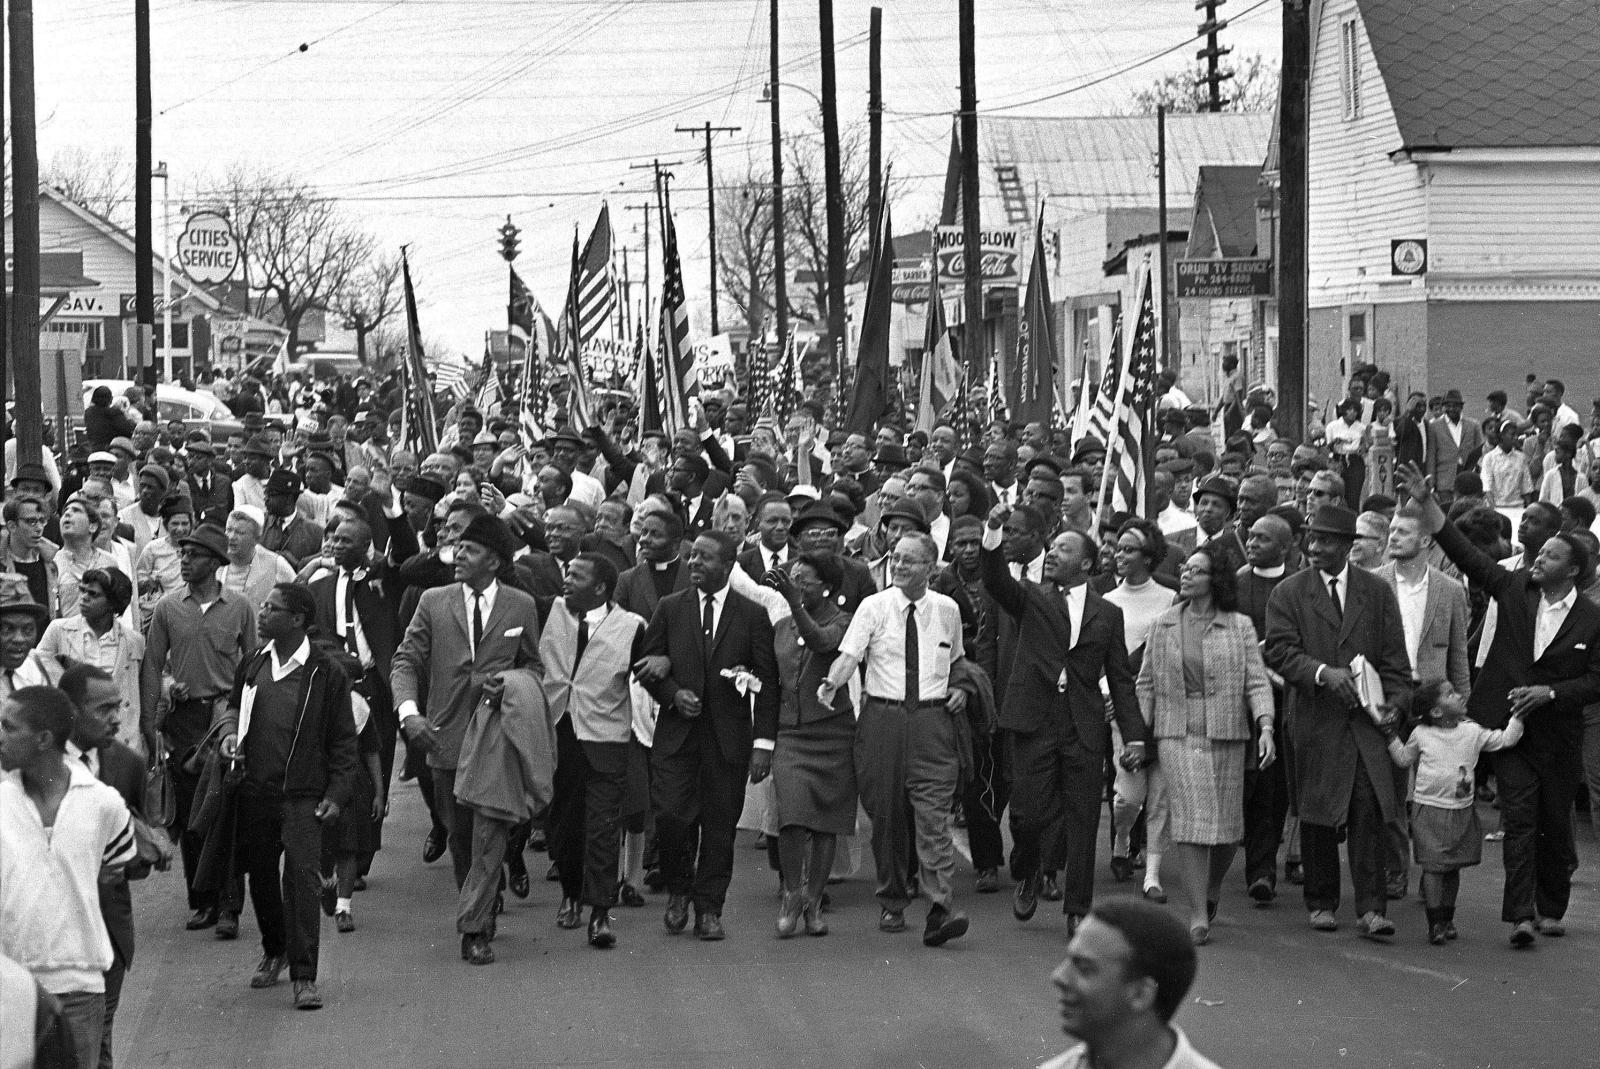 The Selma to Montgomery March